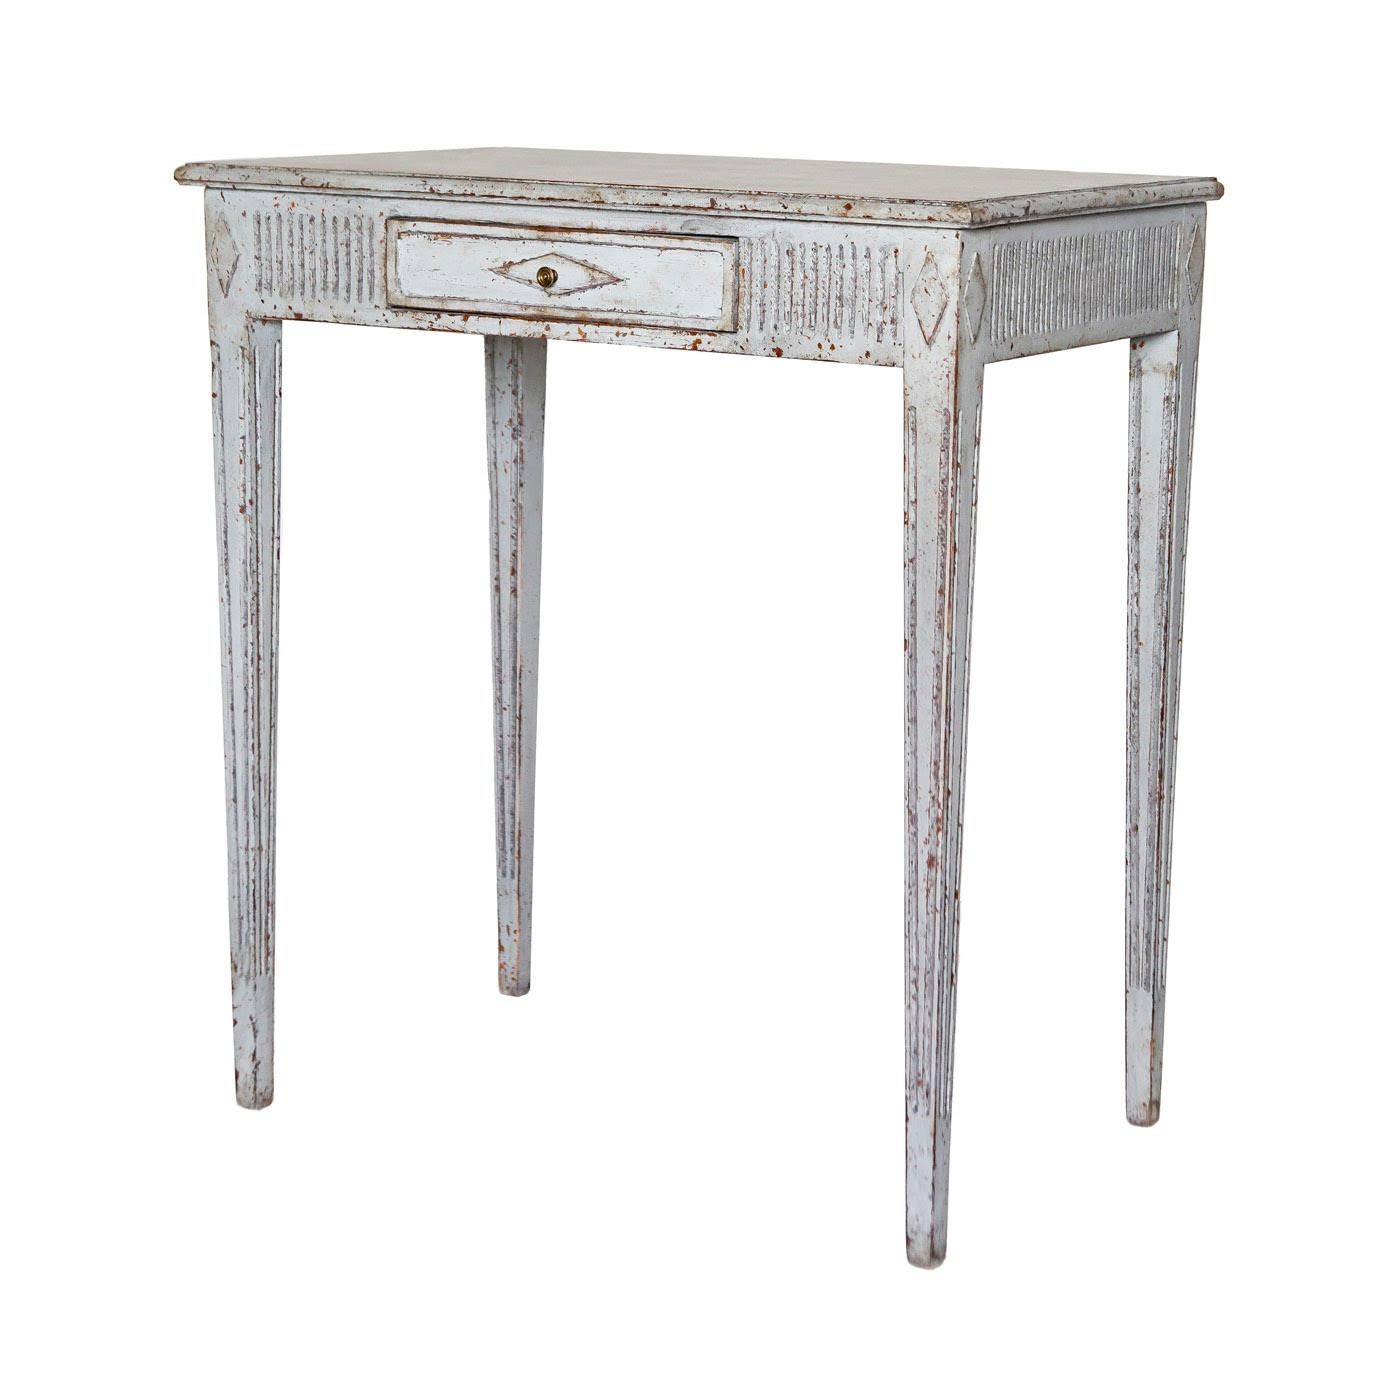 Shipping update - please message us directly with your city and zip/postcode for a delivery cost to your location on this item - please do not request shipping from 1st dibs

Beautiful Gustavian writing table desk from the second half of the 19th